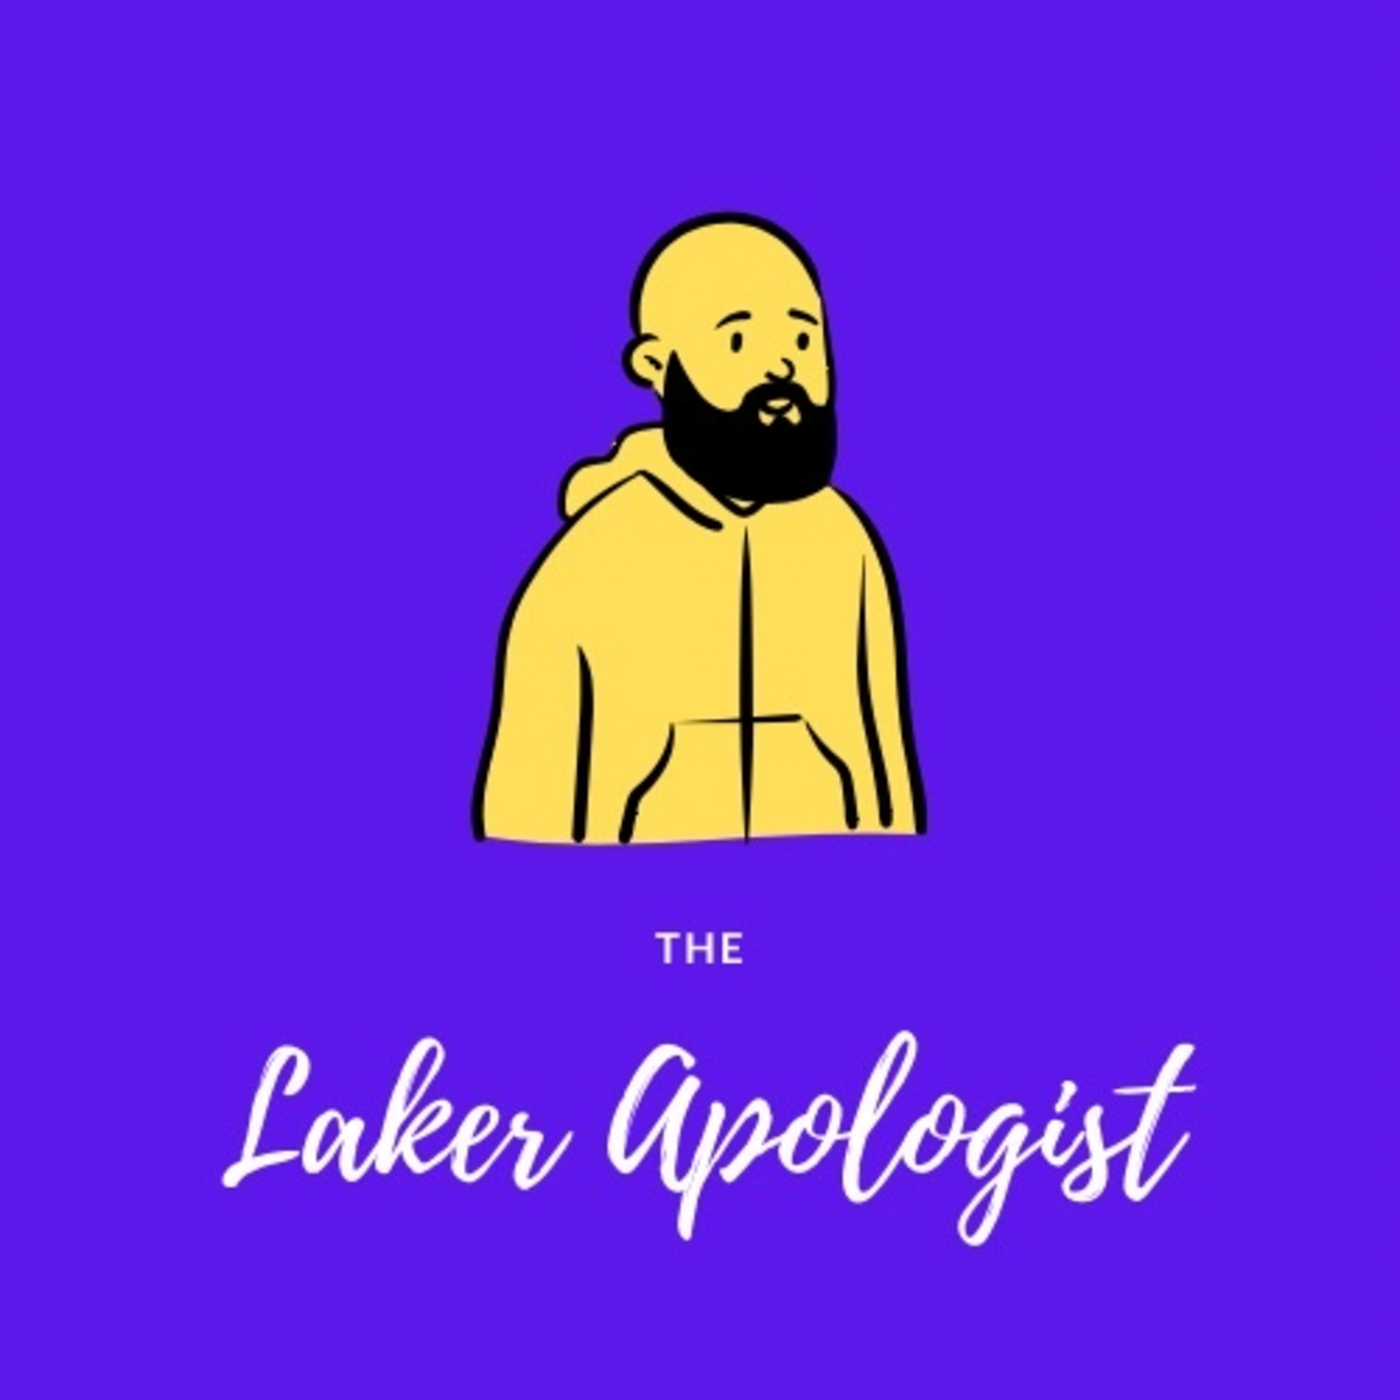 The 20222023 Season updates! The Laker Apologist Podcast.co